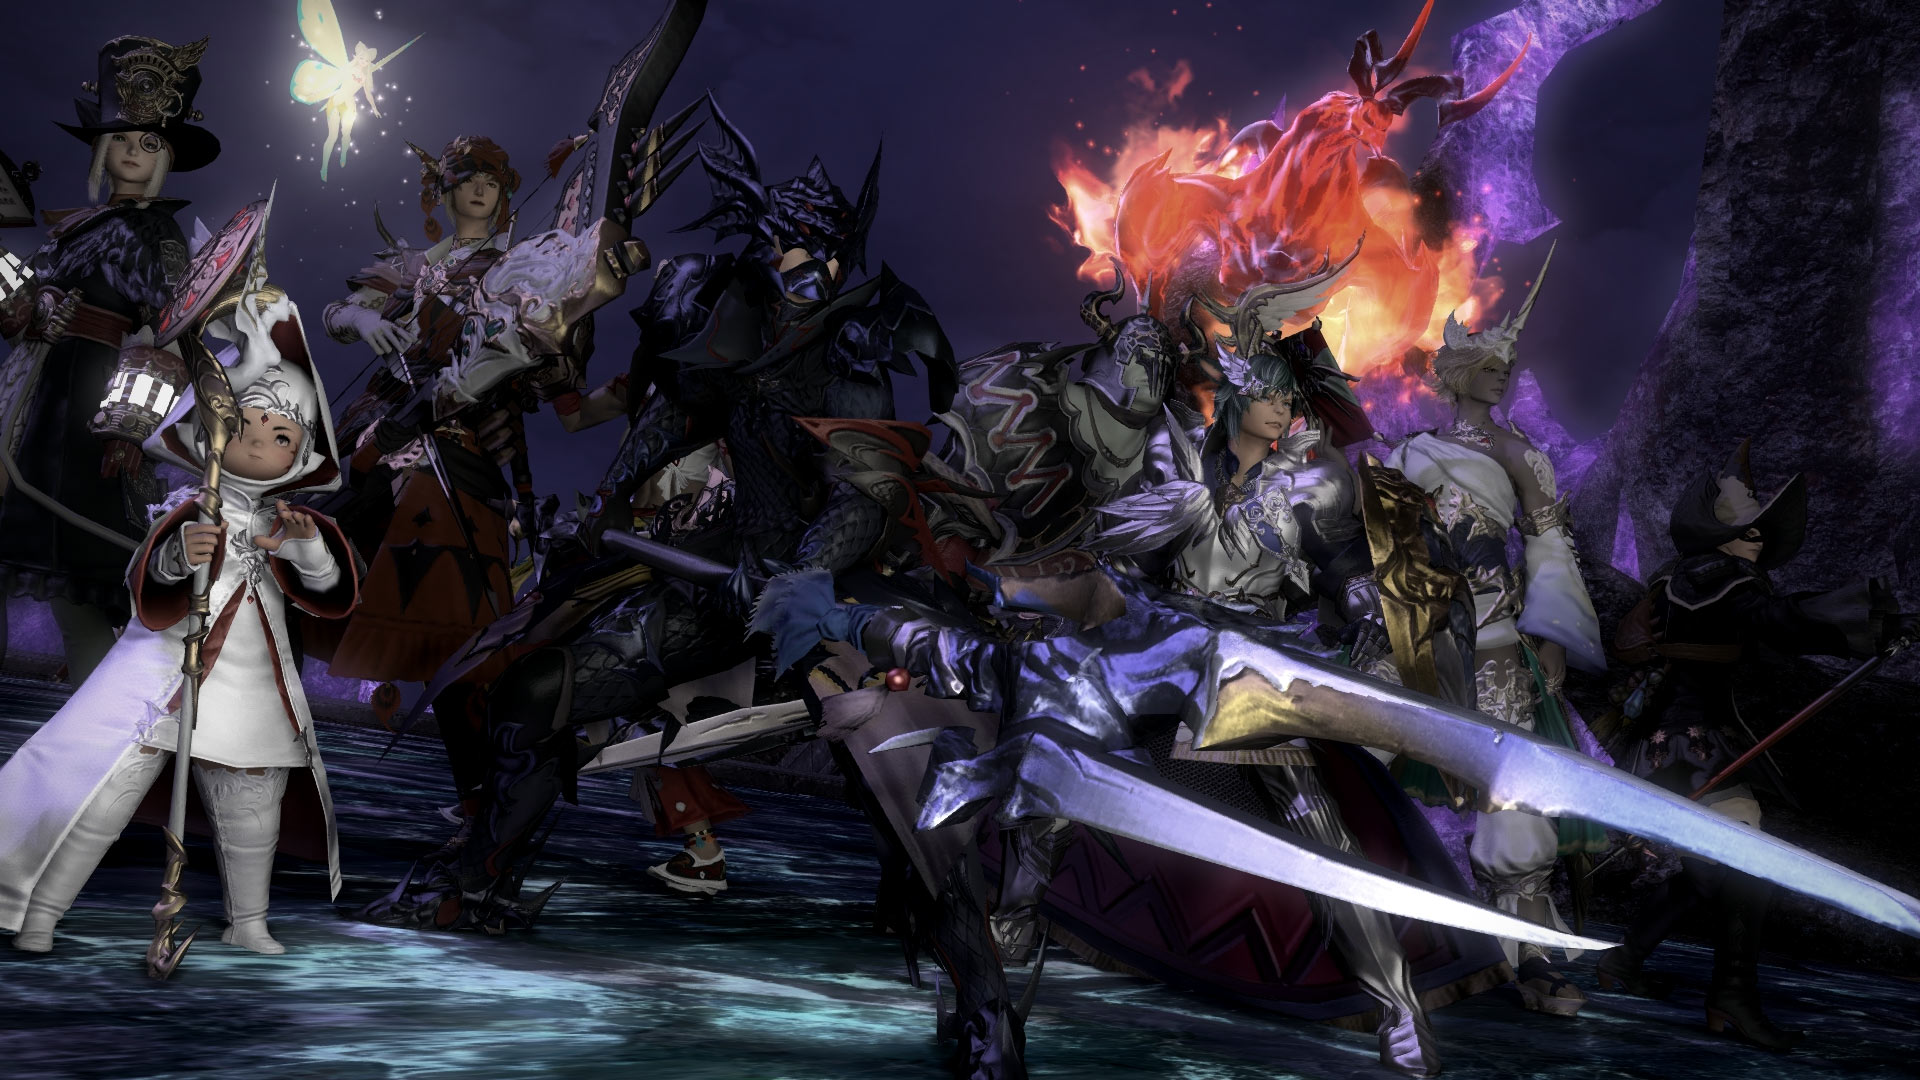 The Casual Gaymer: Presentation and Perception in Final Fantasy XIV